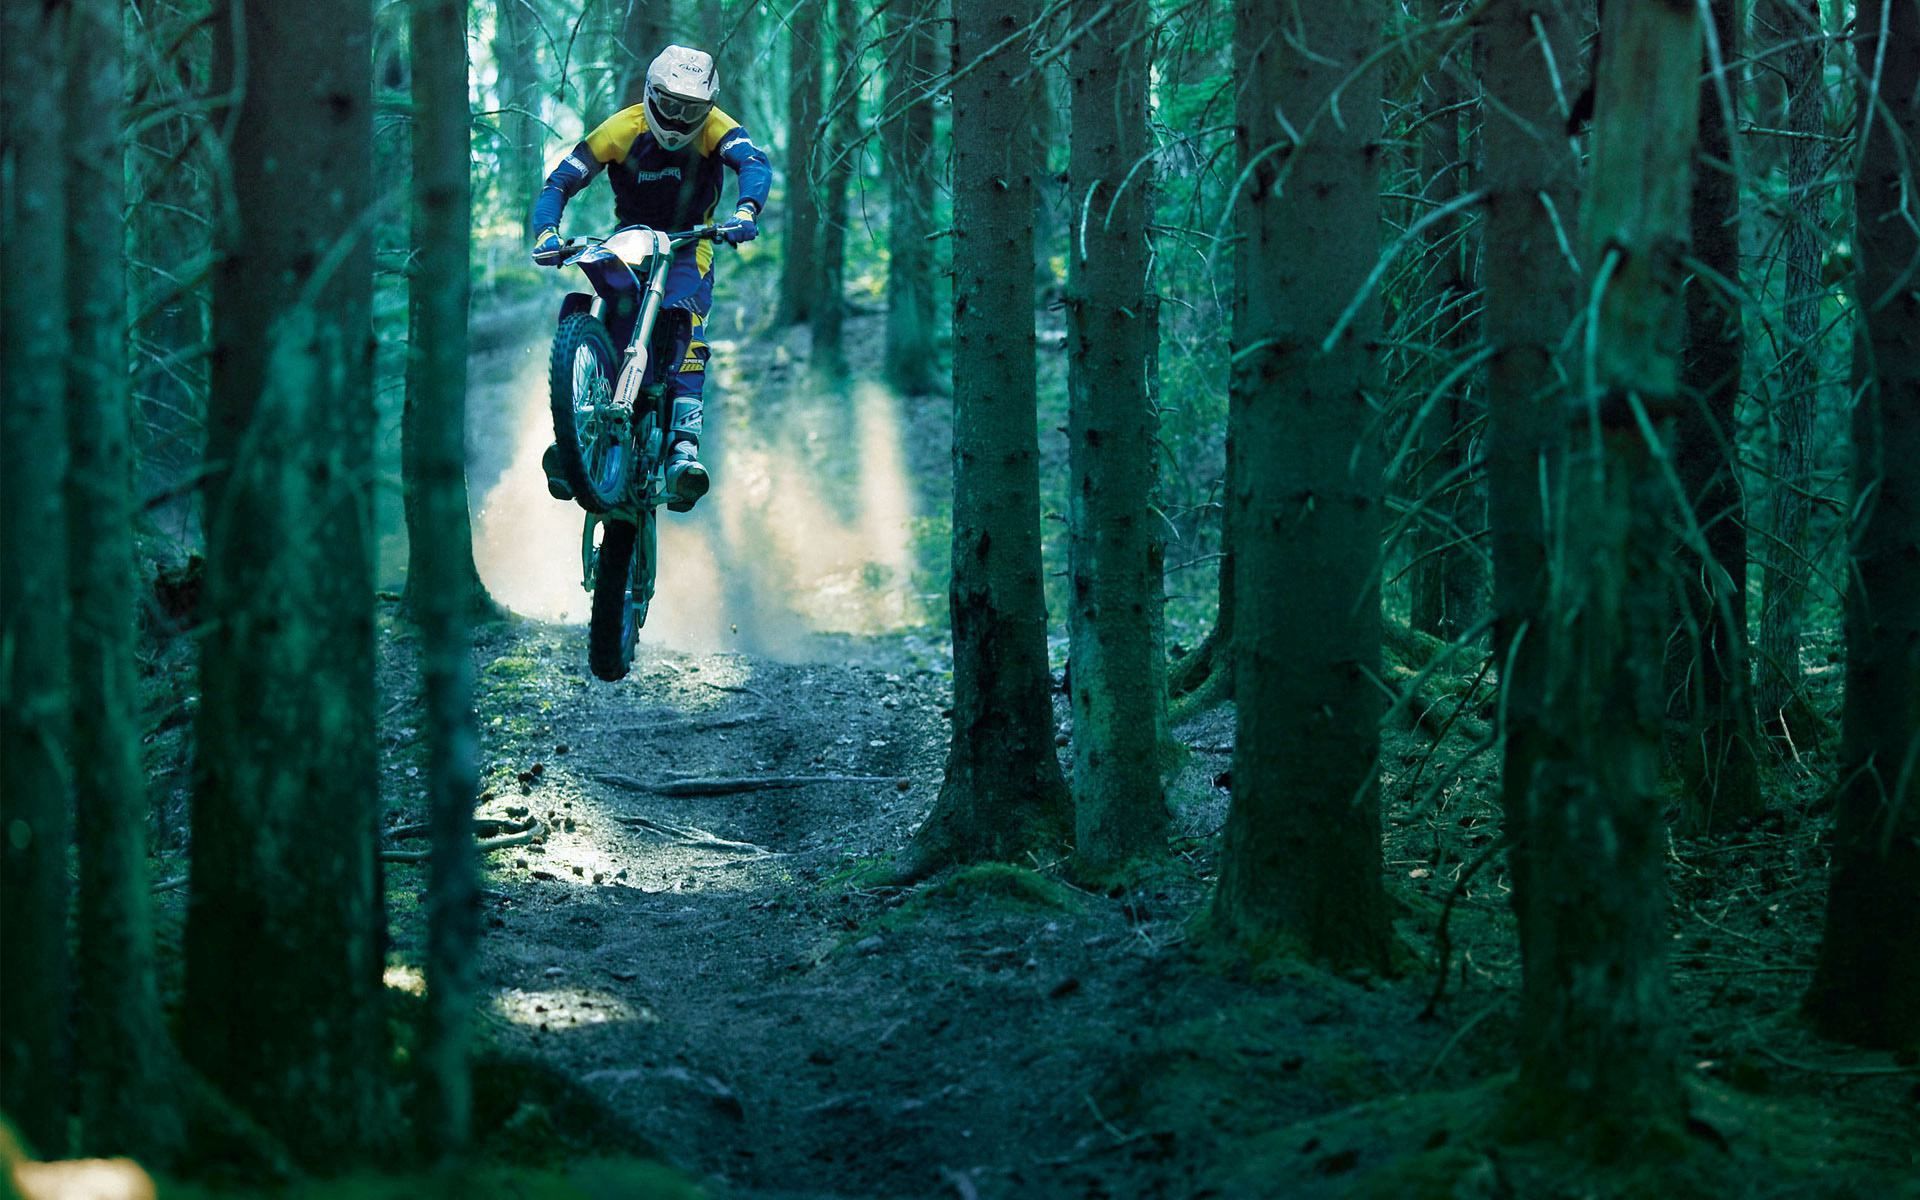 motorcycles, forest, motorcycle, bounce, jump, extreme, racer